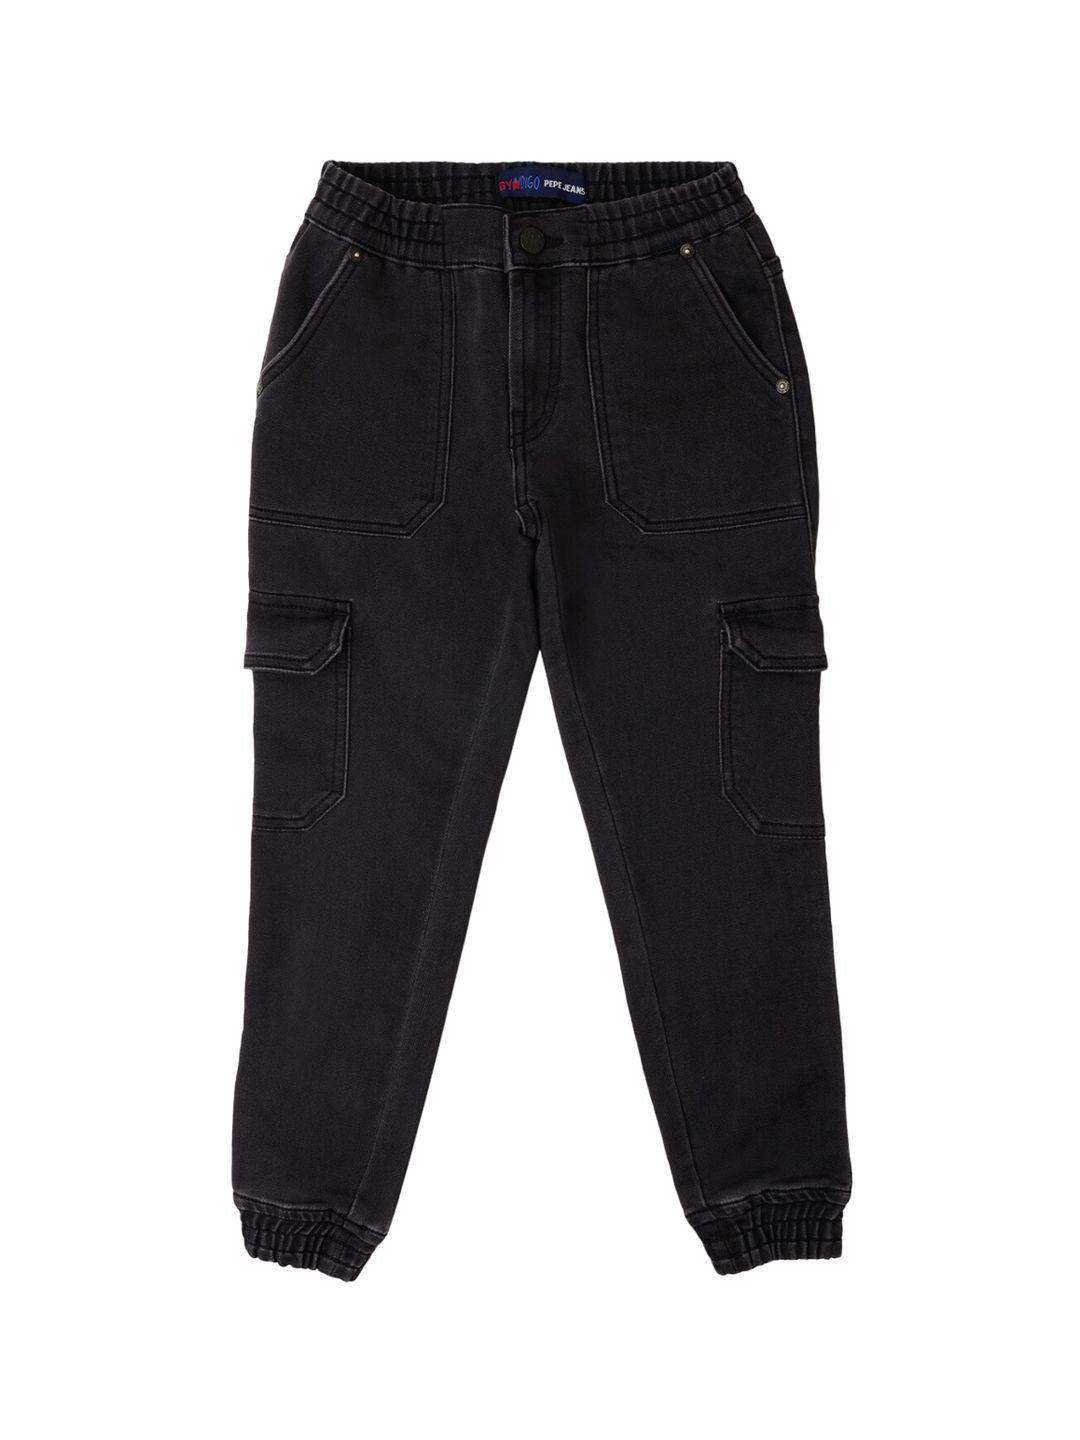 pepe-jeans-boys-mid-rise-slim-fit-chinos-trousers